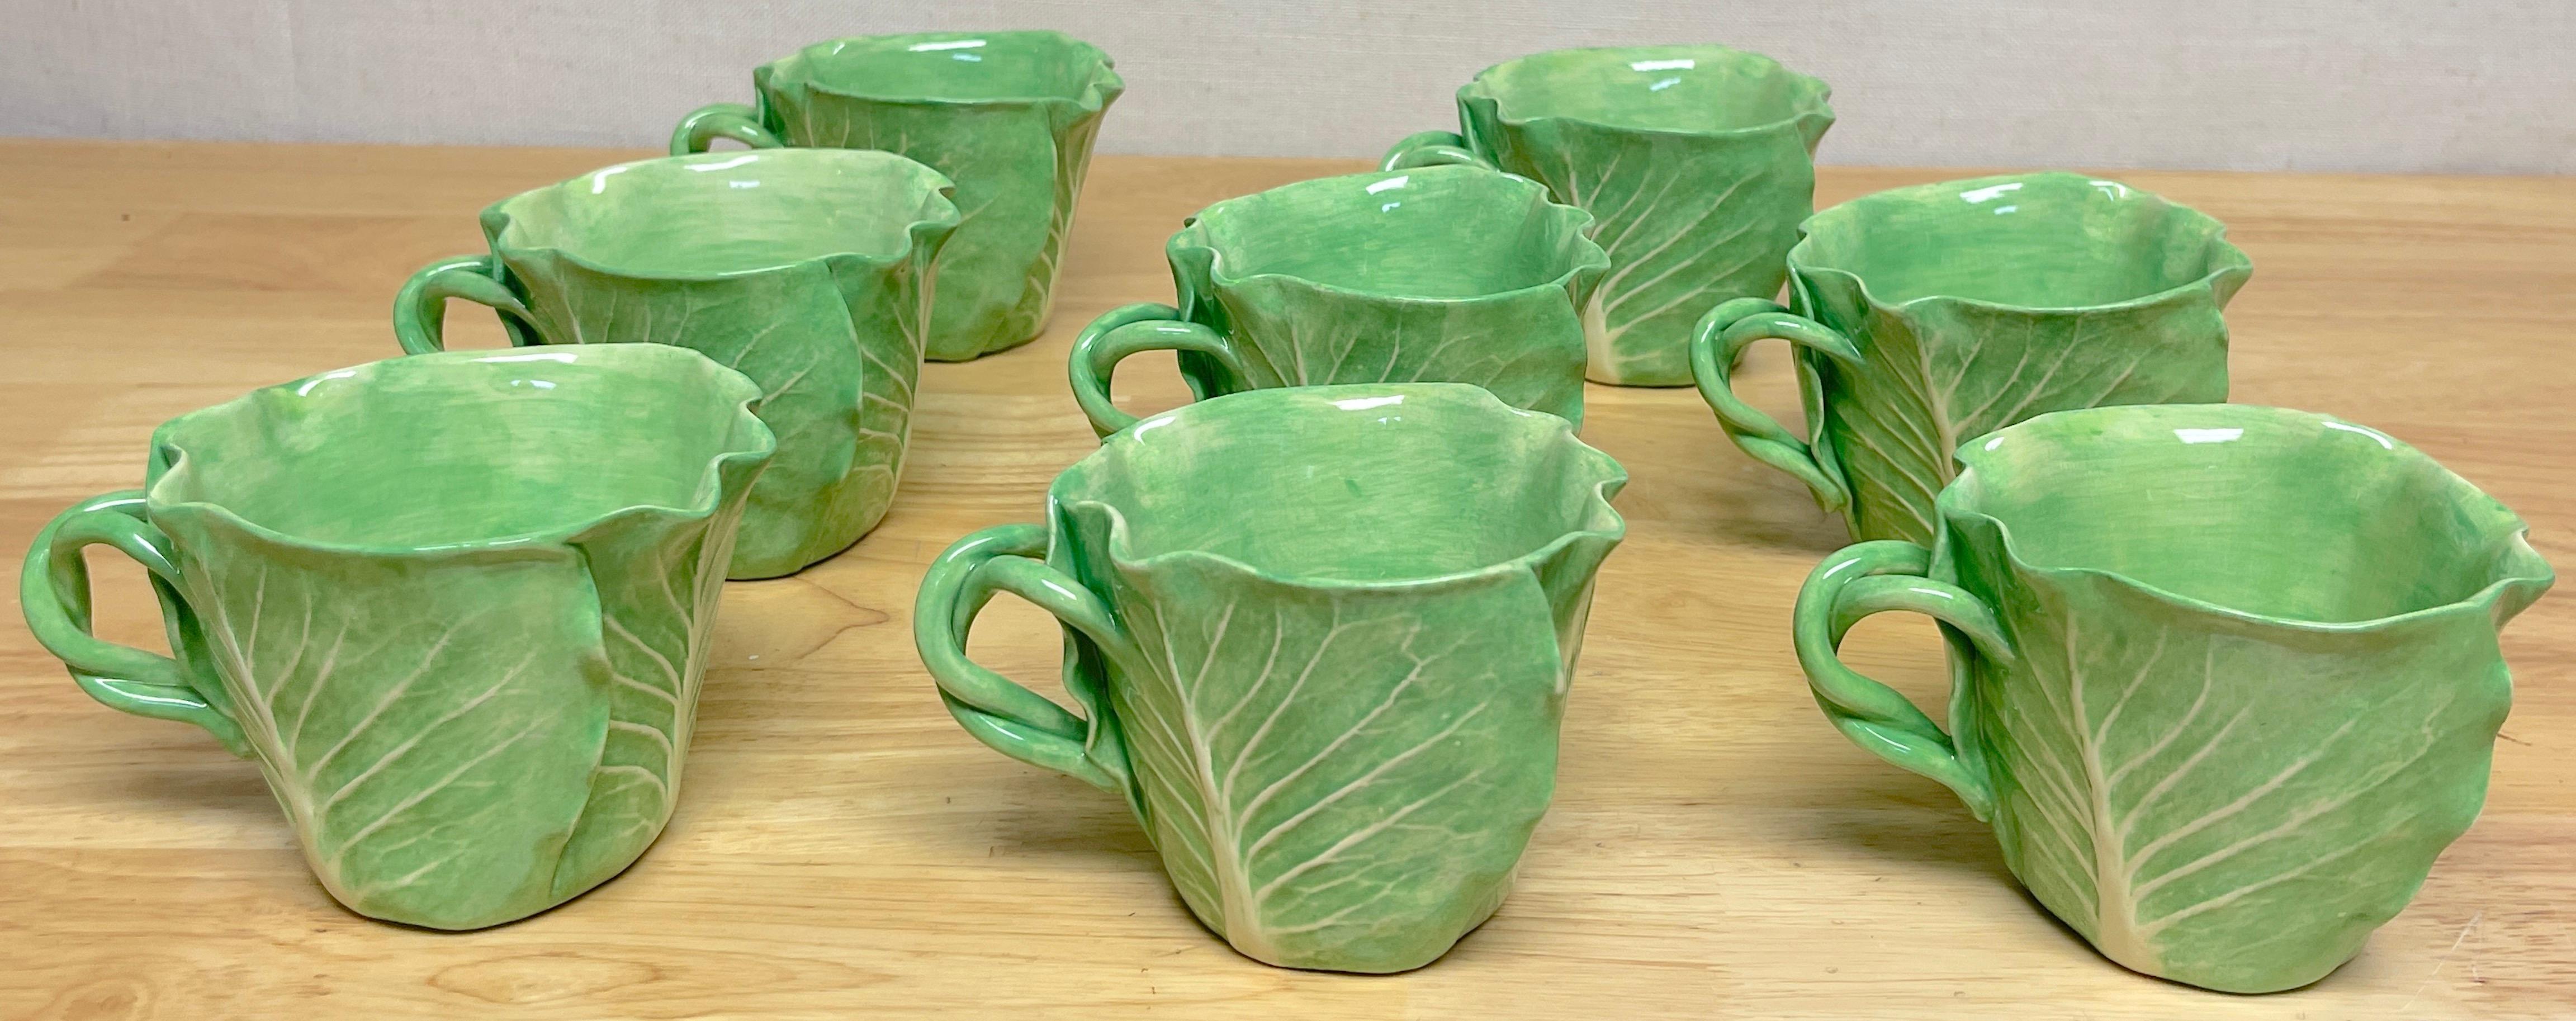 20th Century Dodie Thayer 'Jumbo' Lettuce Leaf Cup & Saucer, 5 Available, Sold Individually